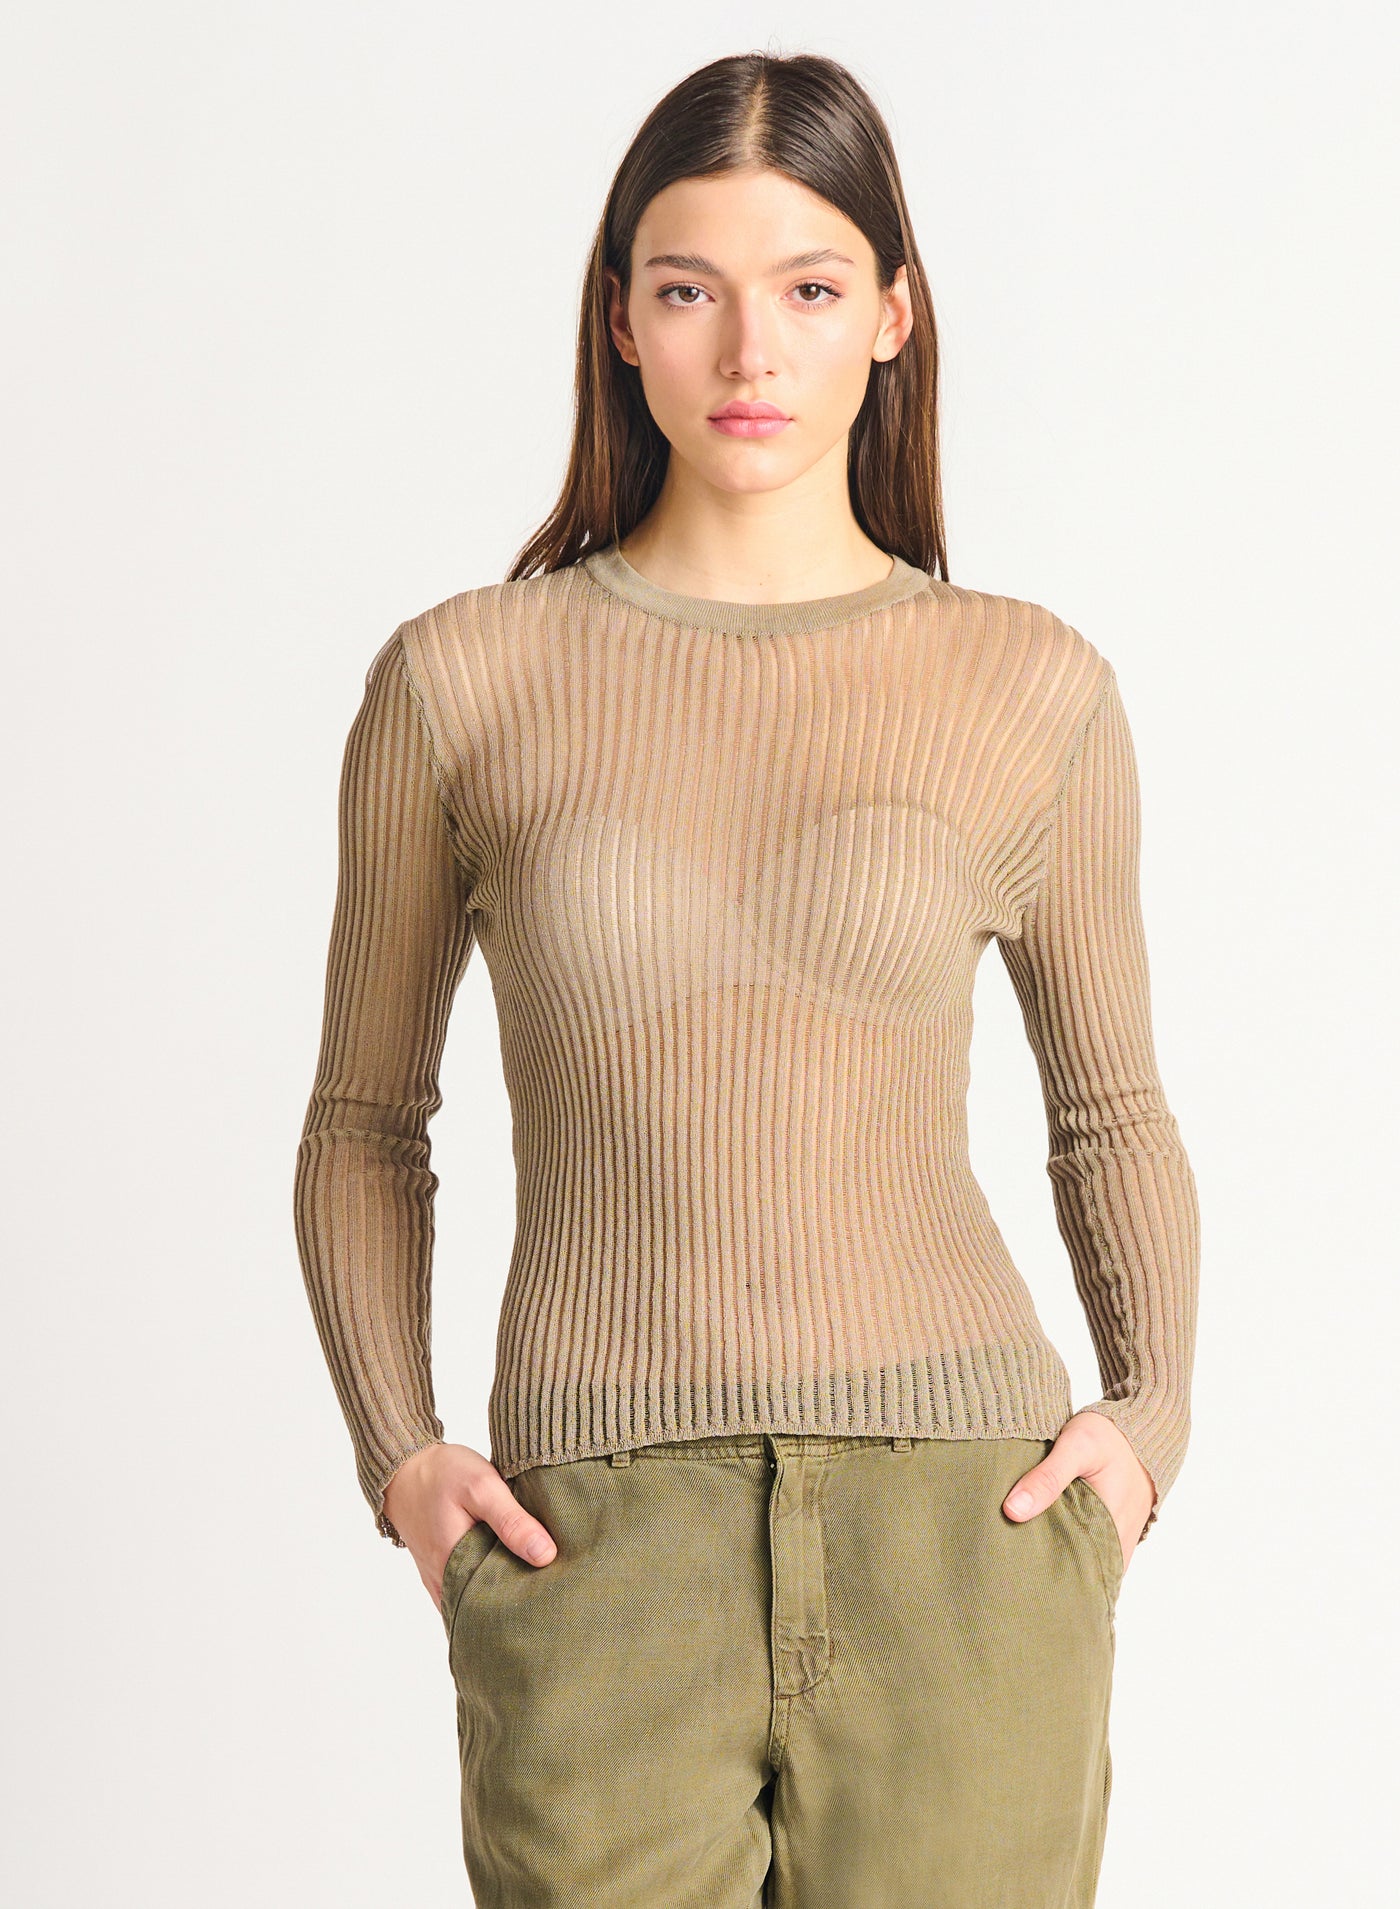 GLAMLY SWEATER TOP- white or soft timber wolf